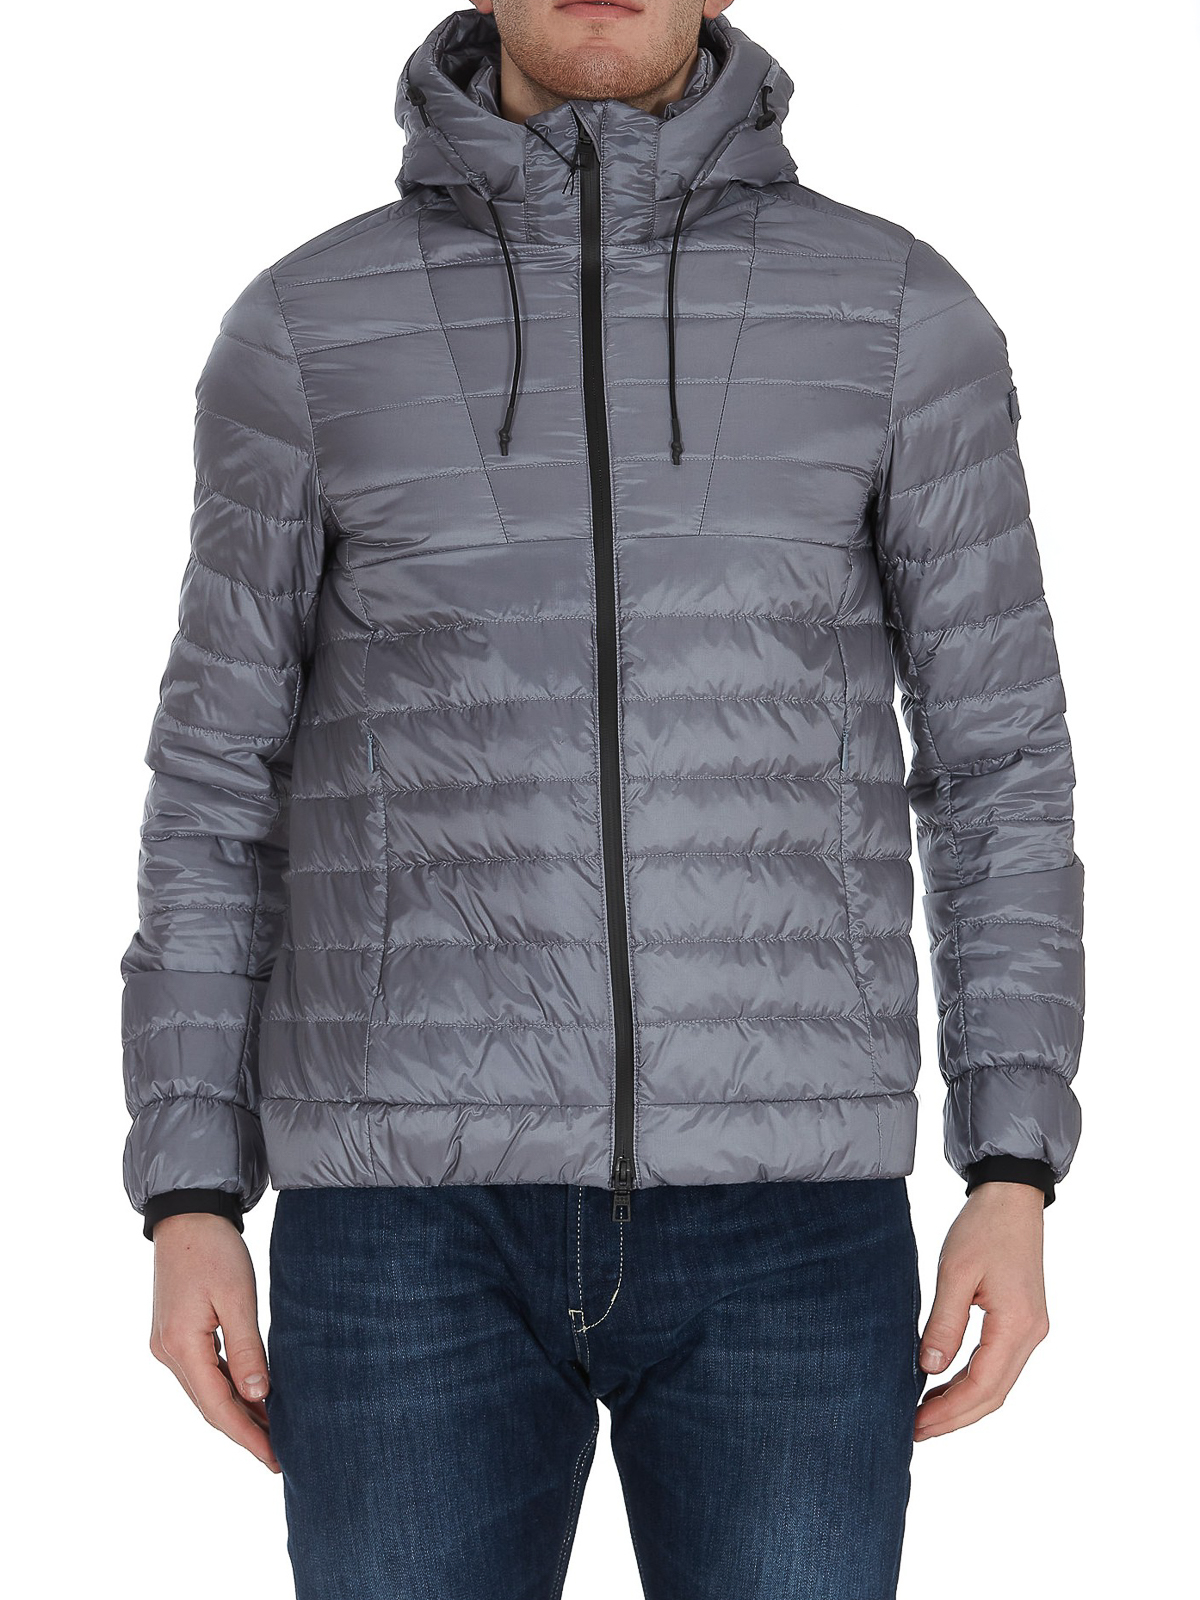 TATRAS - Quilted puffer jacket - padded jackets - MTLA21S412145